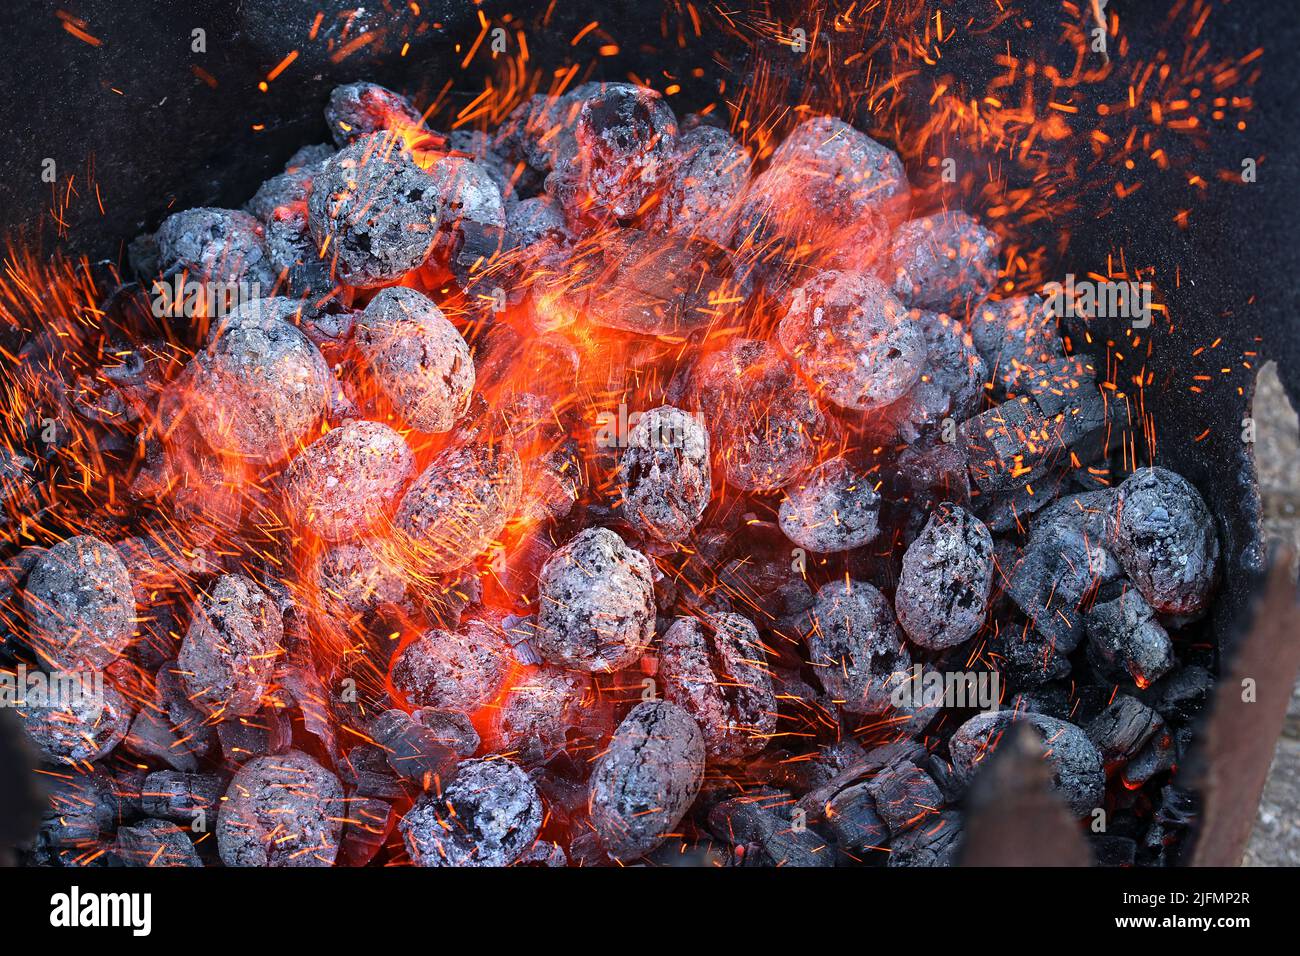 Glimmering heat from glowing charcoal to harden knives Stock Photo